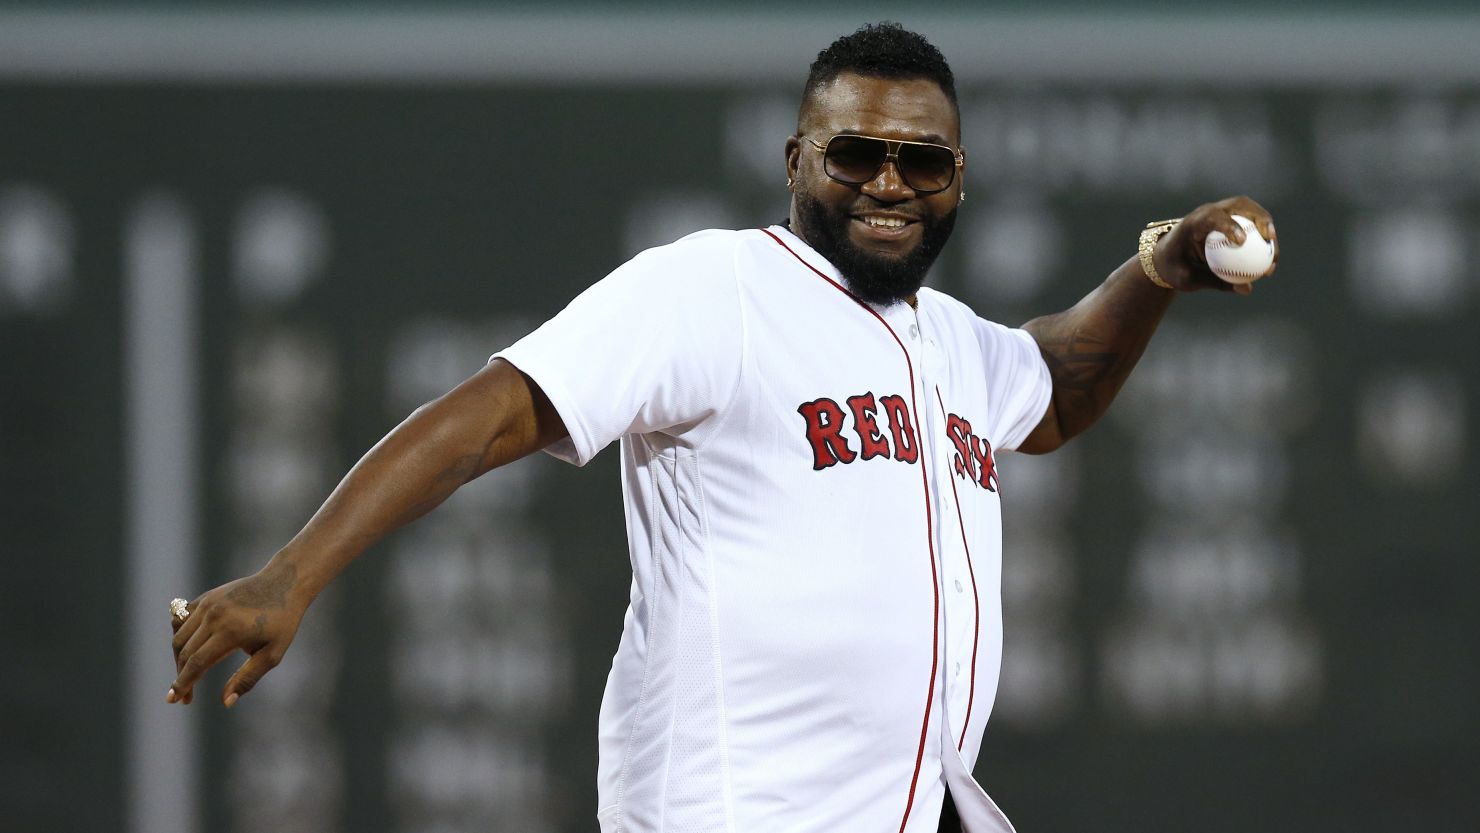 Former Boston Red Sox player David Ortiz throws out a ceremonial first pitch before a baseball game in Boston's Fenway Park on Monday.